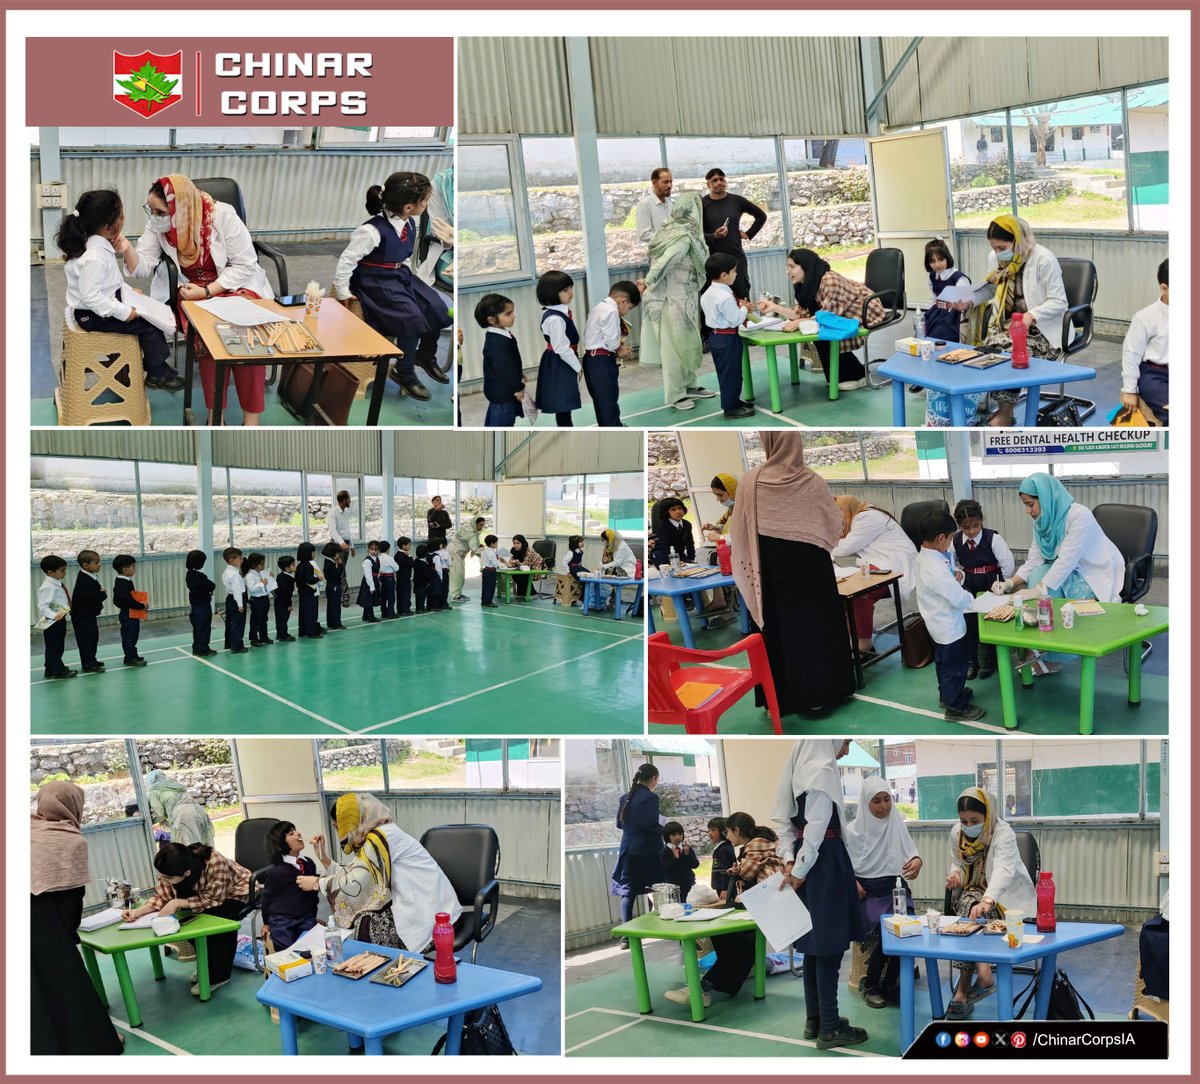 “Brush, floss, checkup - keep that smile on fleek!” #ChinarWarriors teamed up with Civil Administration in #Qazigund to host a Dental Camp at Army Goodwill School, Wuzur. Over 300 #Students received dental check-ups & medicines, ensuring healthier smiles all around. #wecare